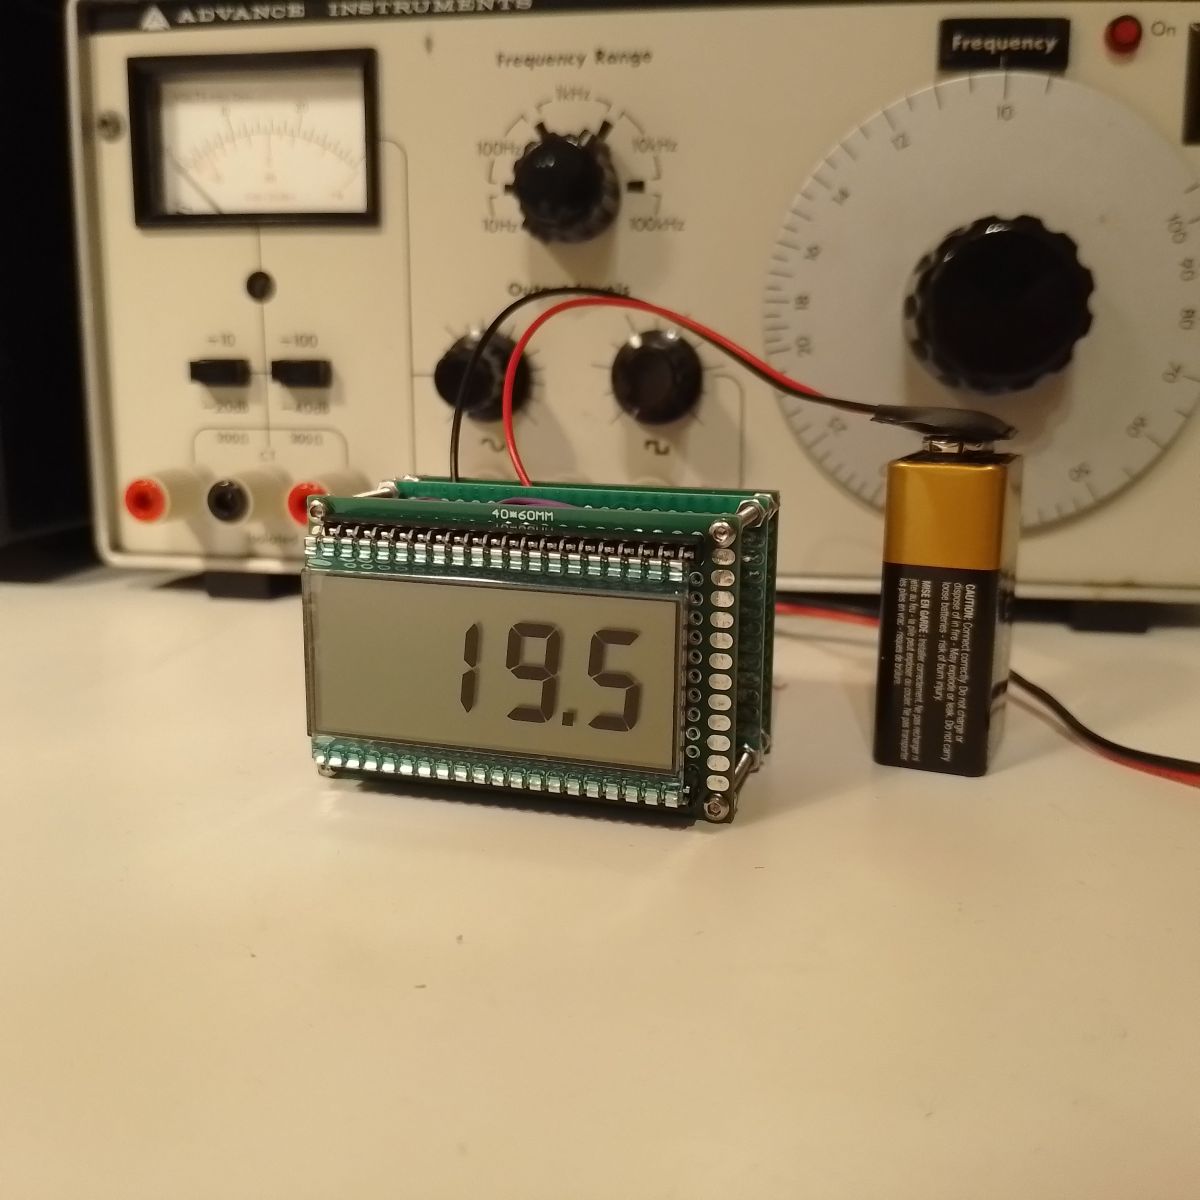 LCD temperature meter with ICL7106